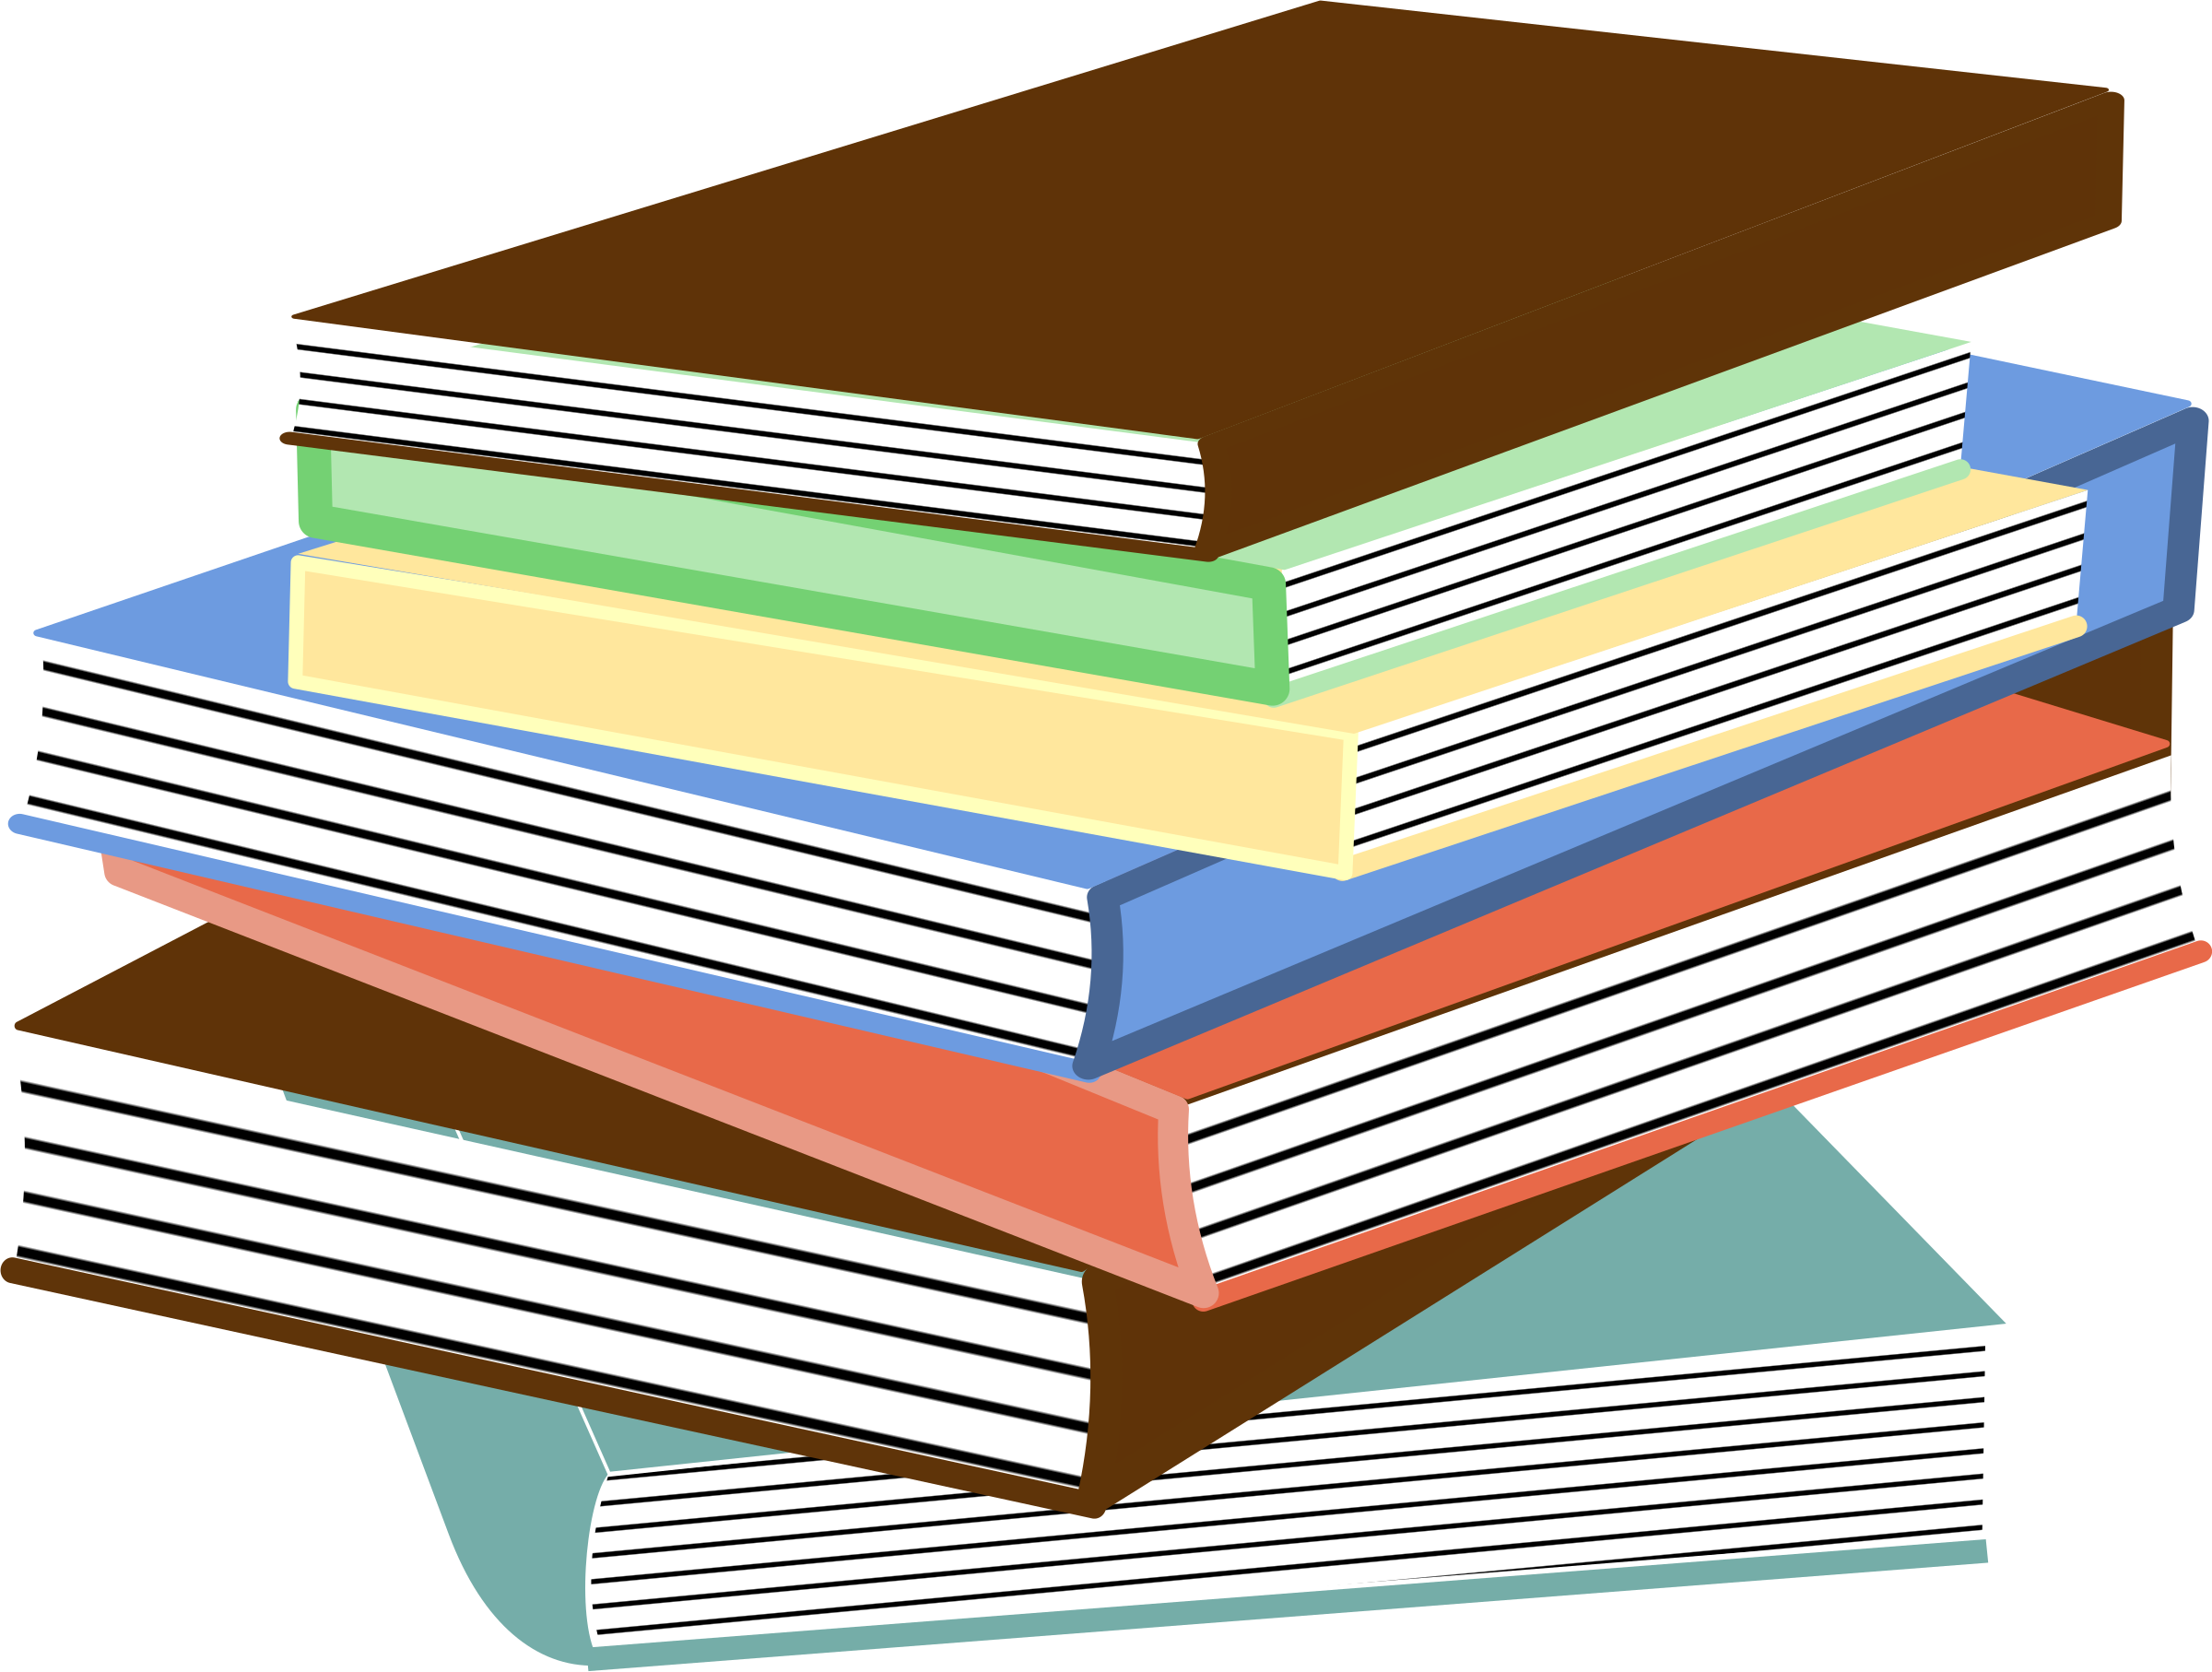 Book Stack Clip art - Store Shelf png download - 2400*1814 - Free